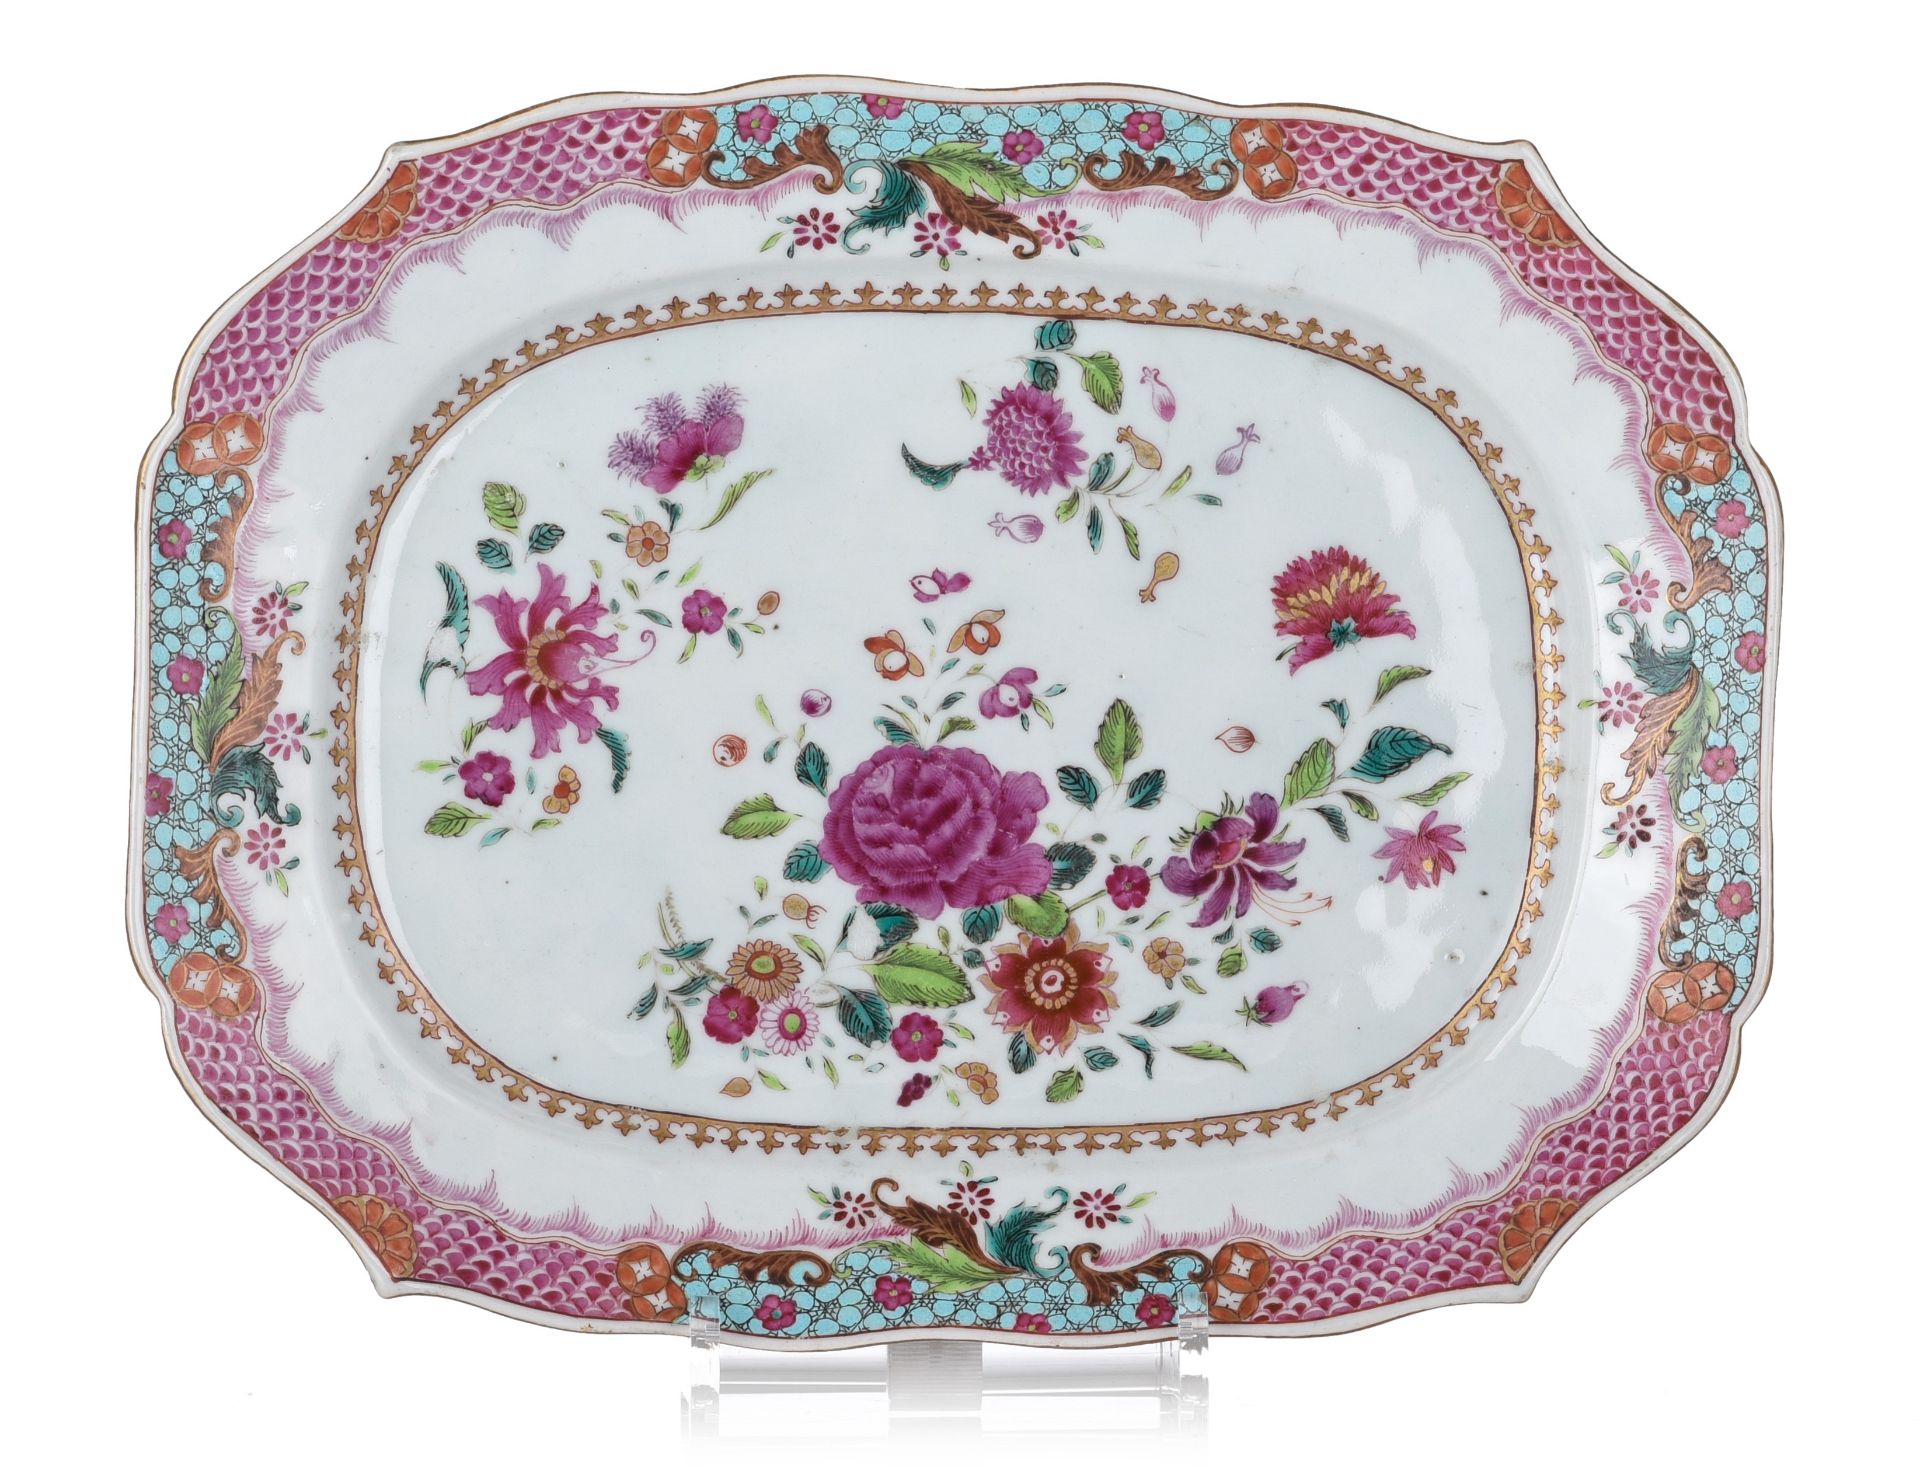 A collection of fine Chinese famille rose export porcelain dishes and a plate, 18thC, largest dimens - Image 8 of 10